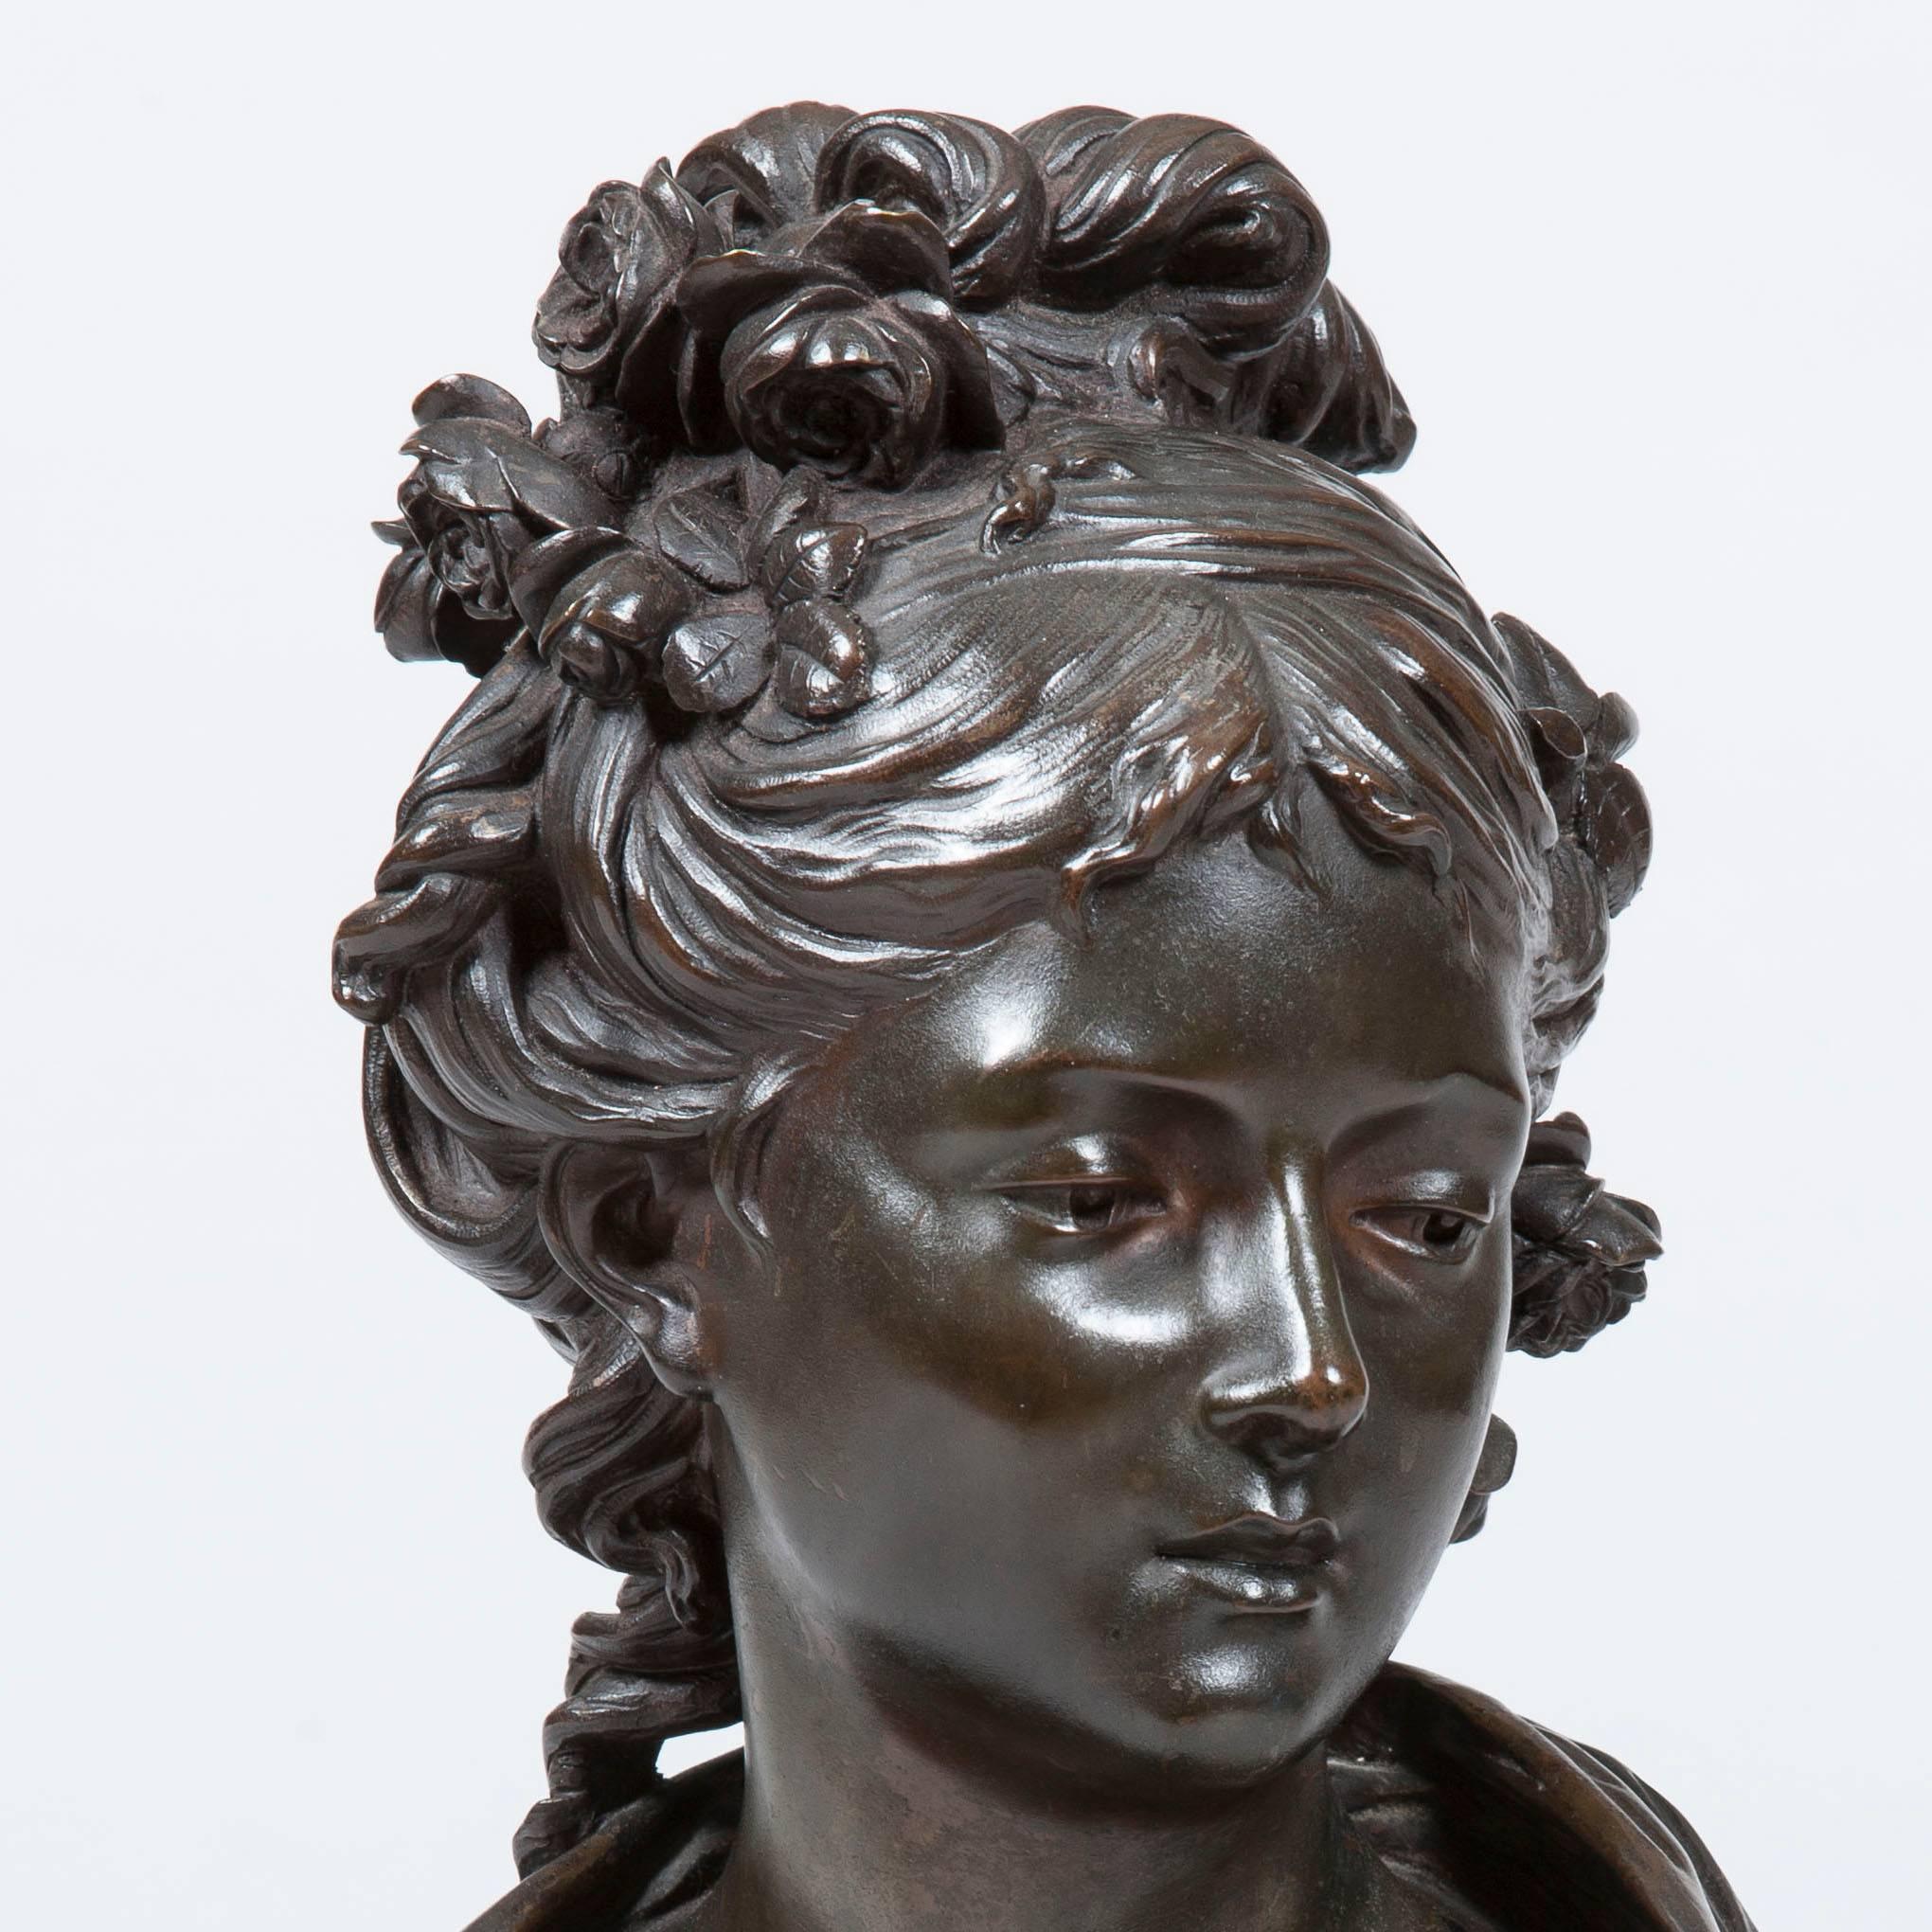 A patinated bronze bust of a Maiden

Signed L. Gregoiré (for Jean- Louis Gregoire)

Jean- Louis Gregoire (1840-1890), a pupil of the École des Beaux-Arts of Paris, displayed his works at the Paris Salon from 1867 until his death. His works are